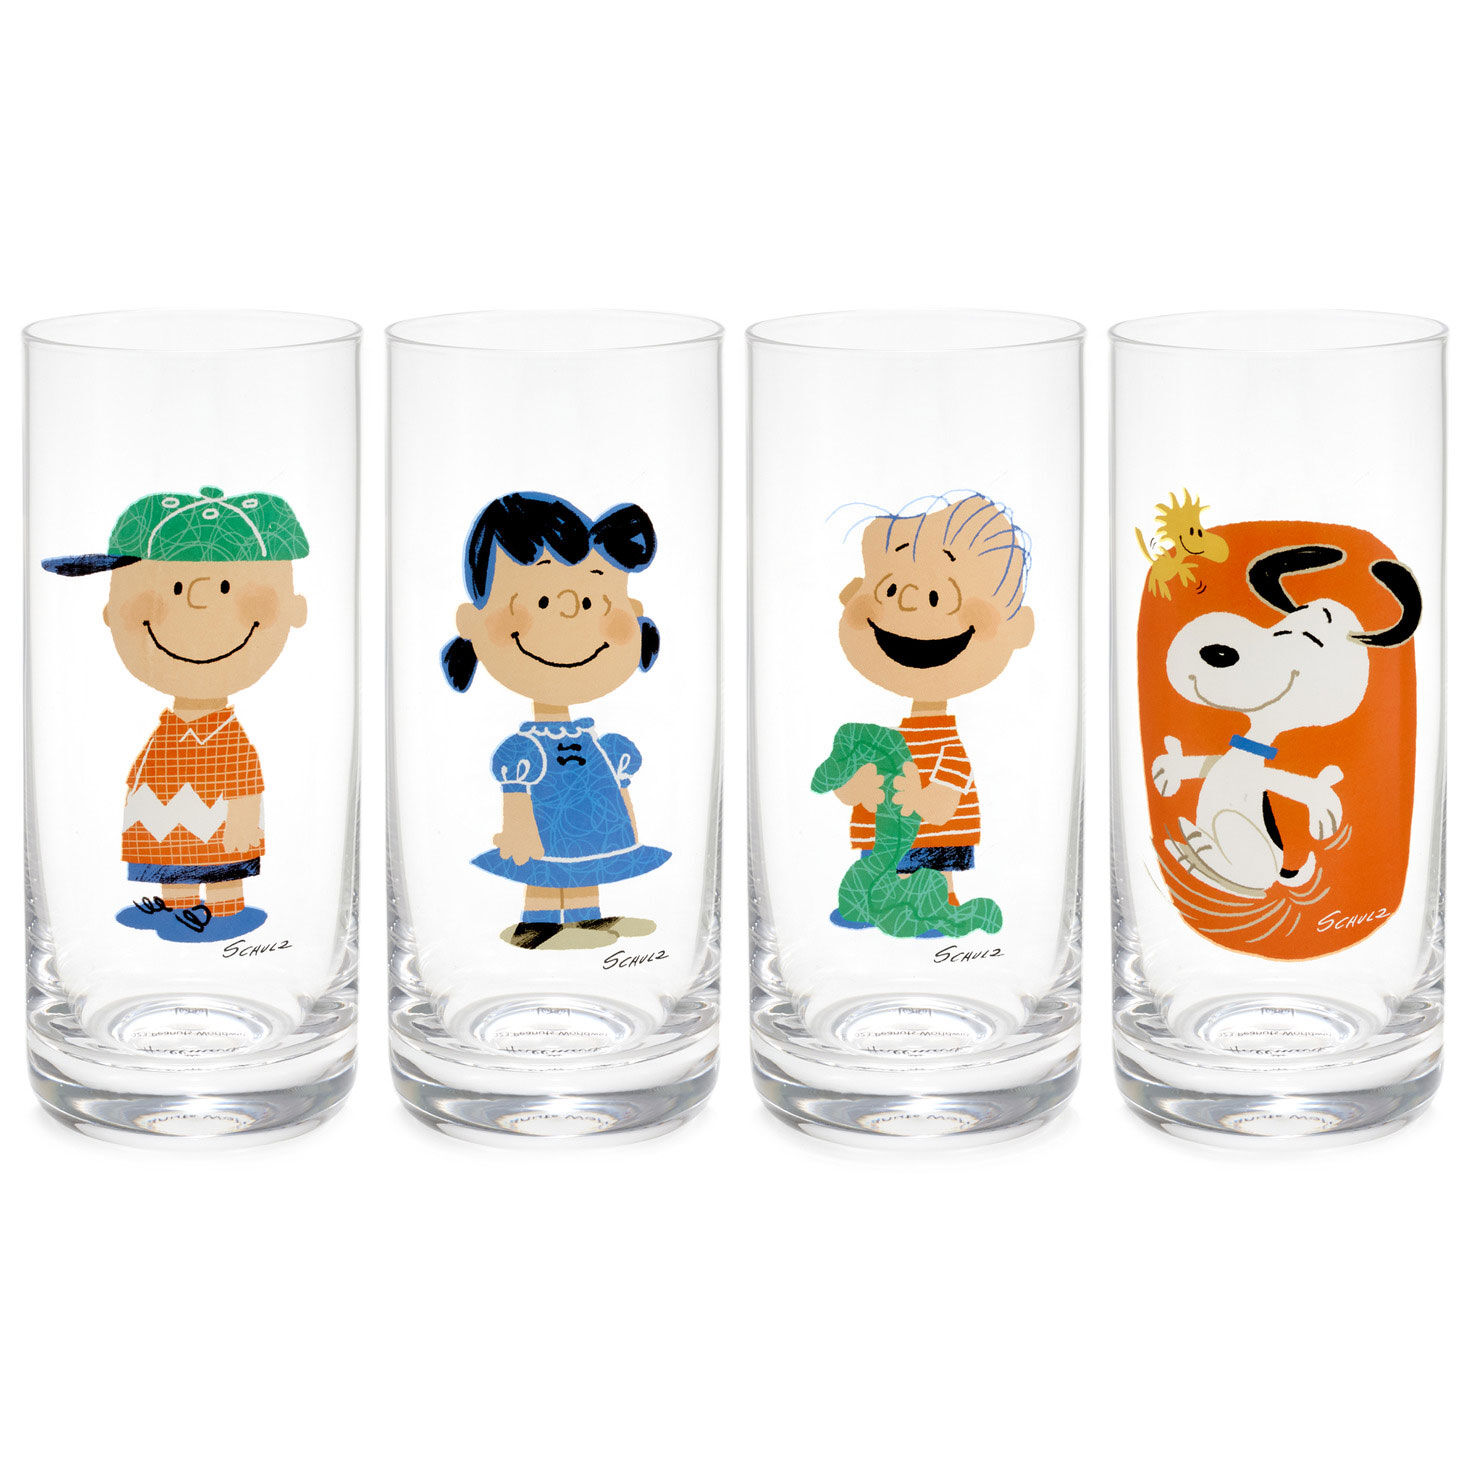 Peanuts® Snoopy and Friends Tall Drinking Glasses, Set of 4 for only USD 39.99 | Hallmark